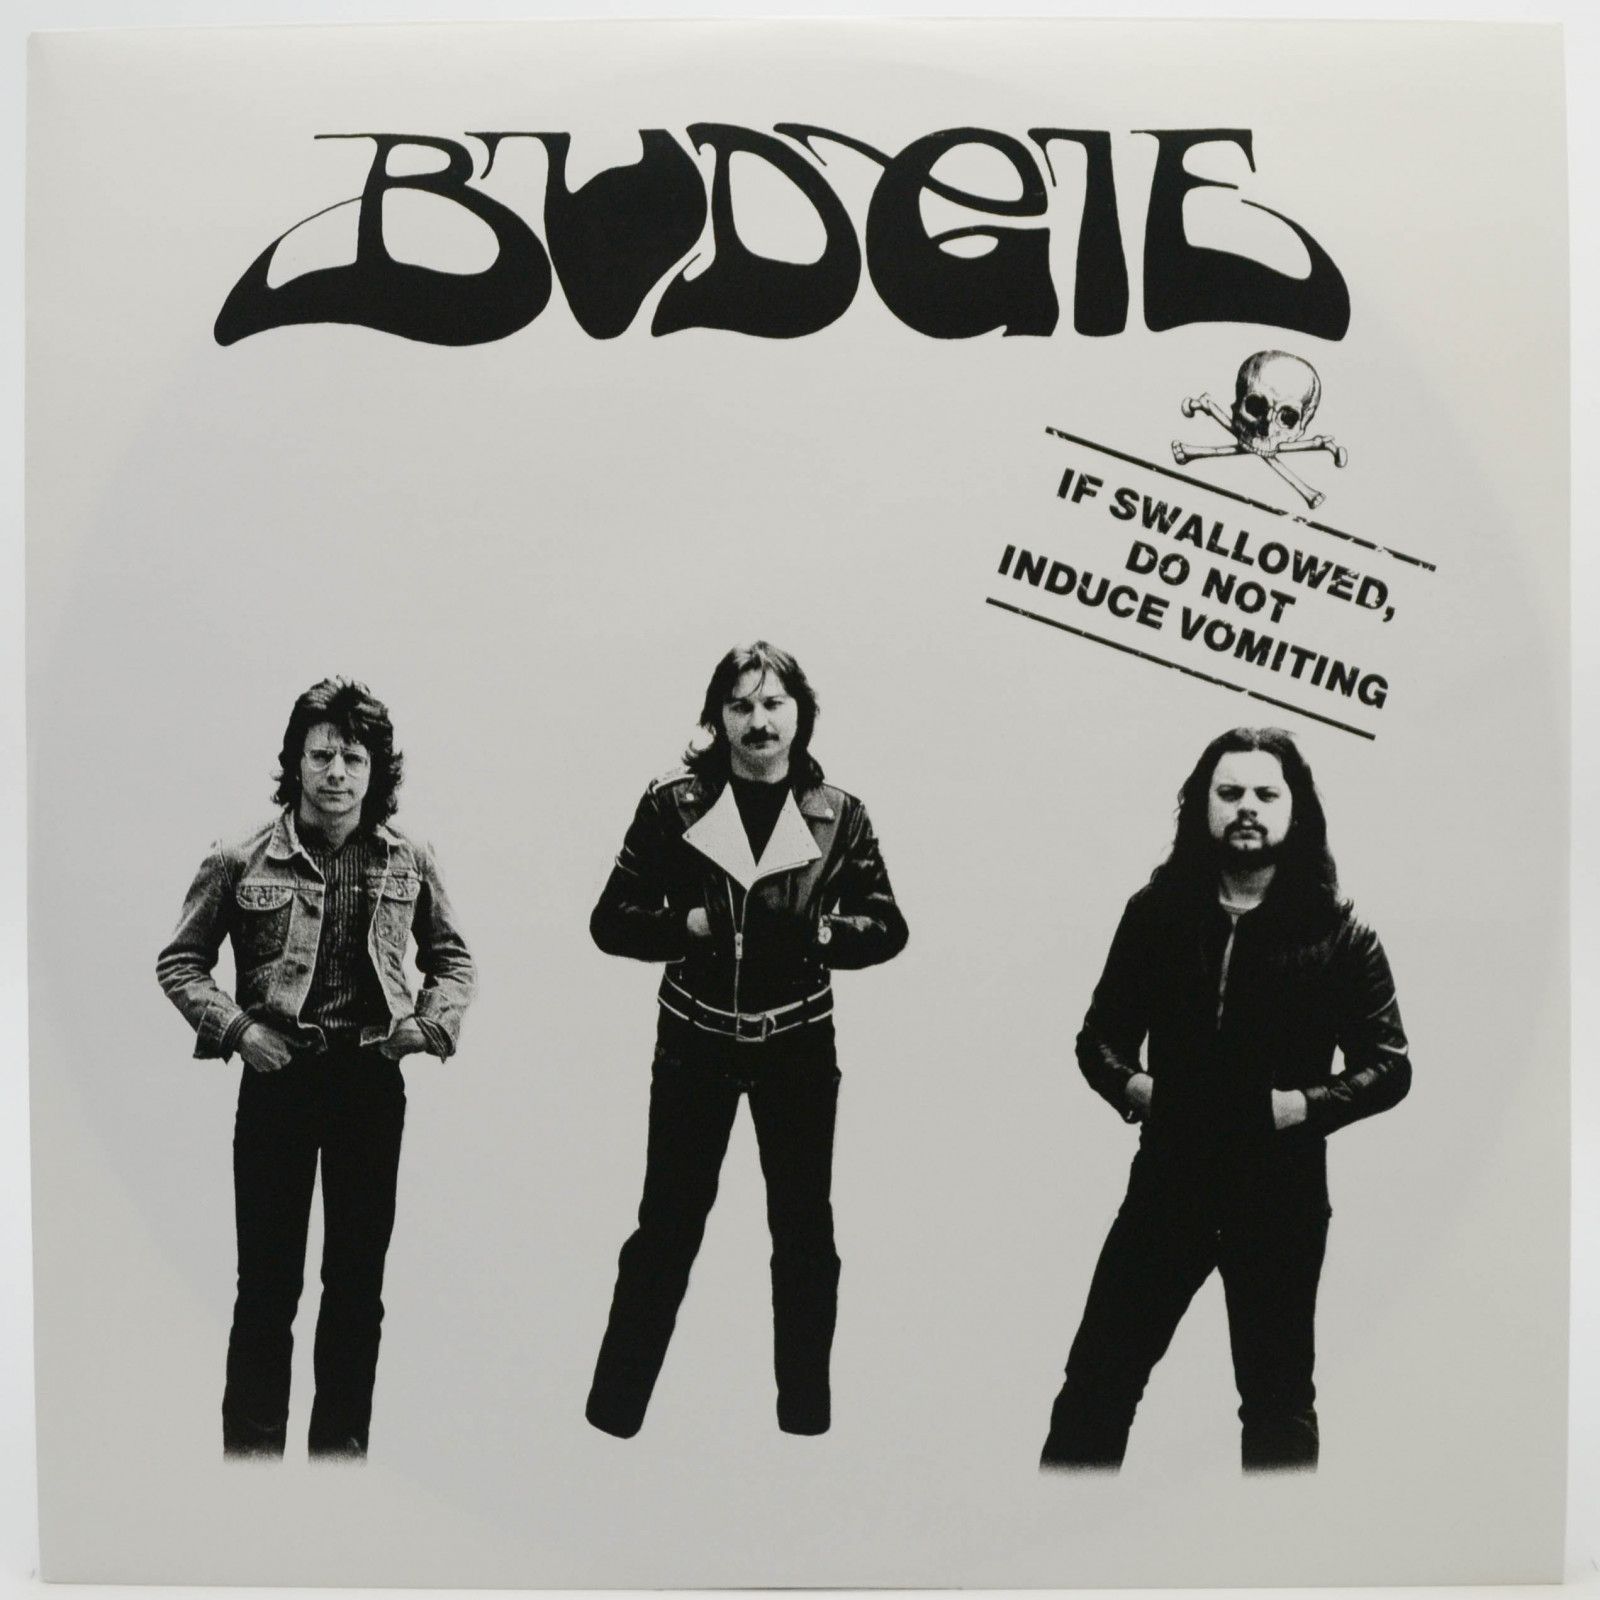 Budgie — If Swallowed, Do Not Induce Vomiting, 1980